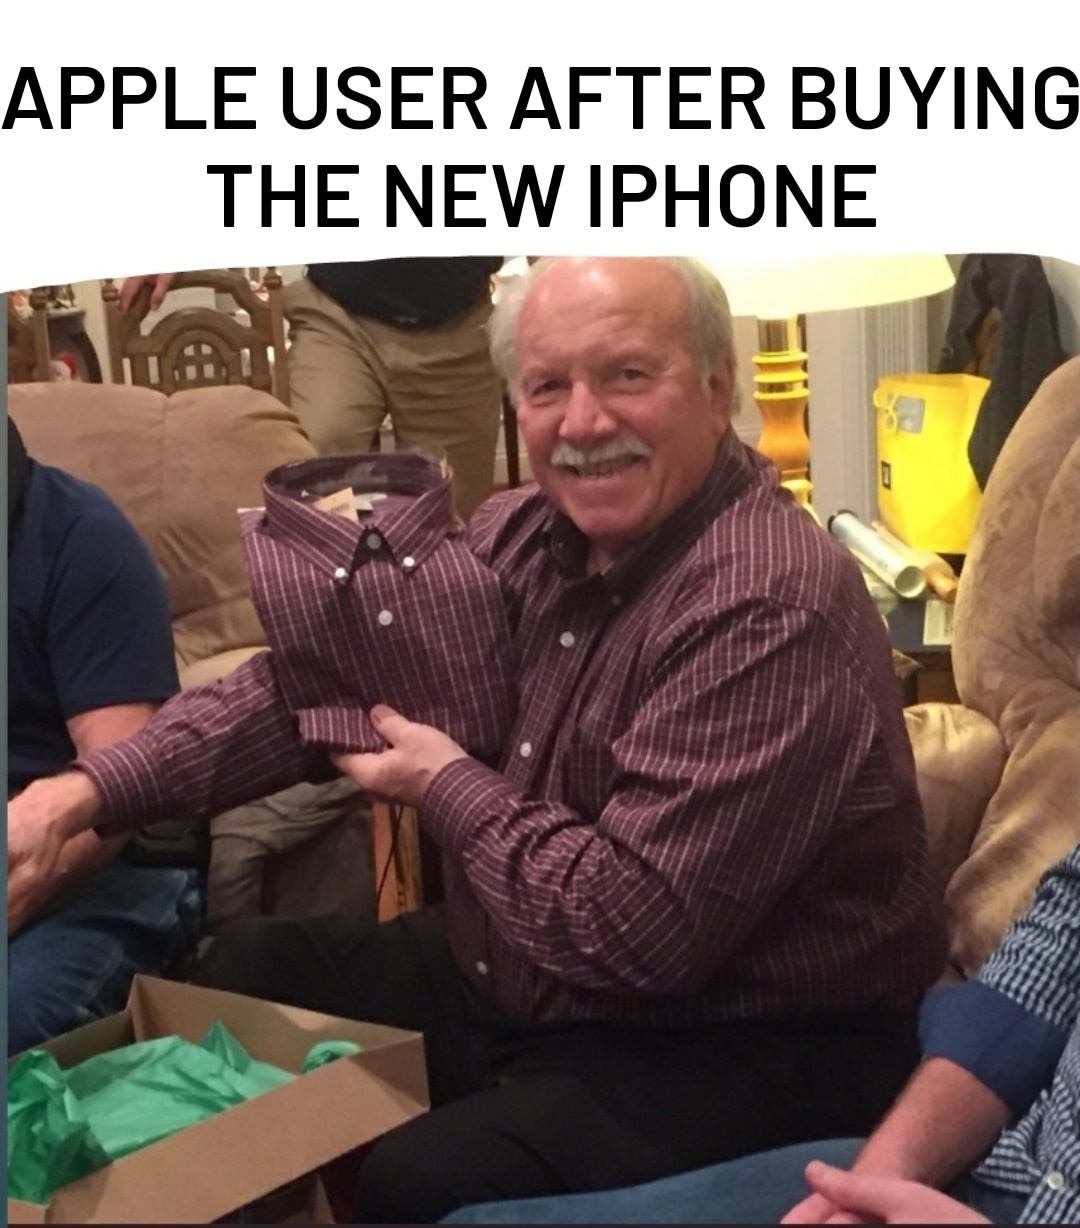 zach wilson funny memes - Apple User After Buying The New Iphone 0